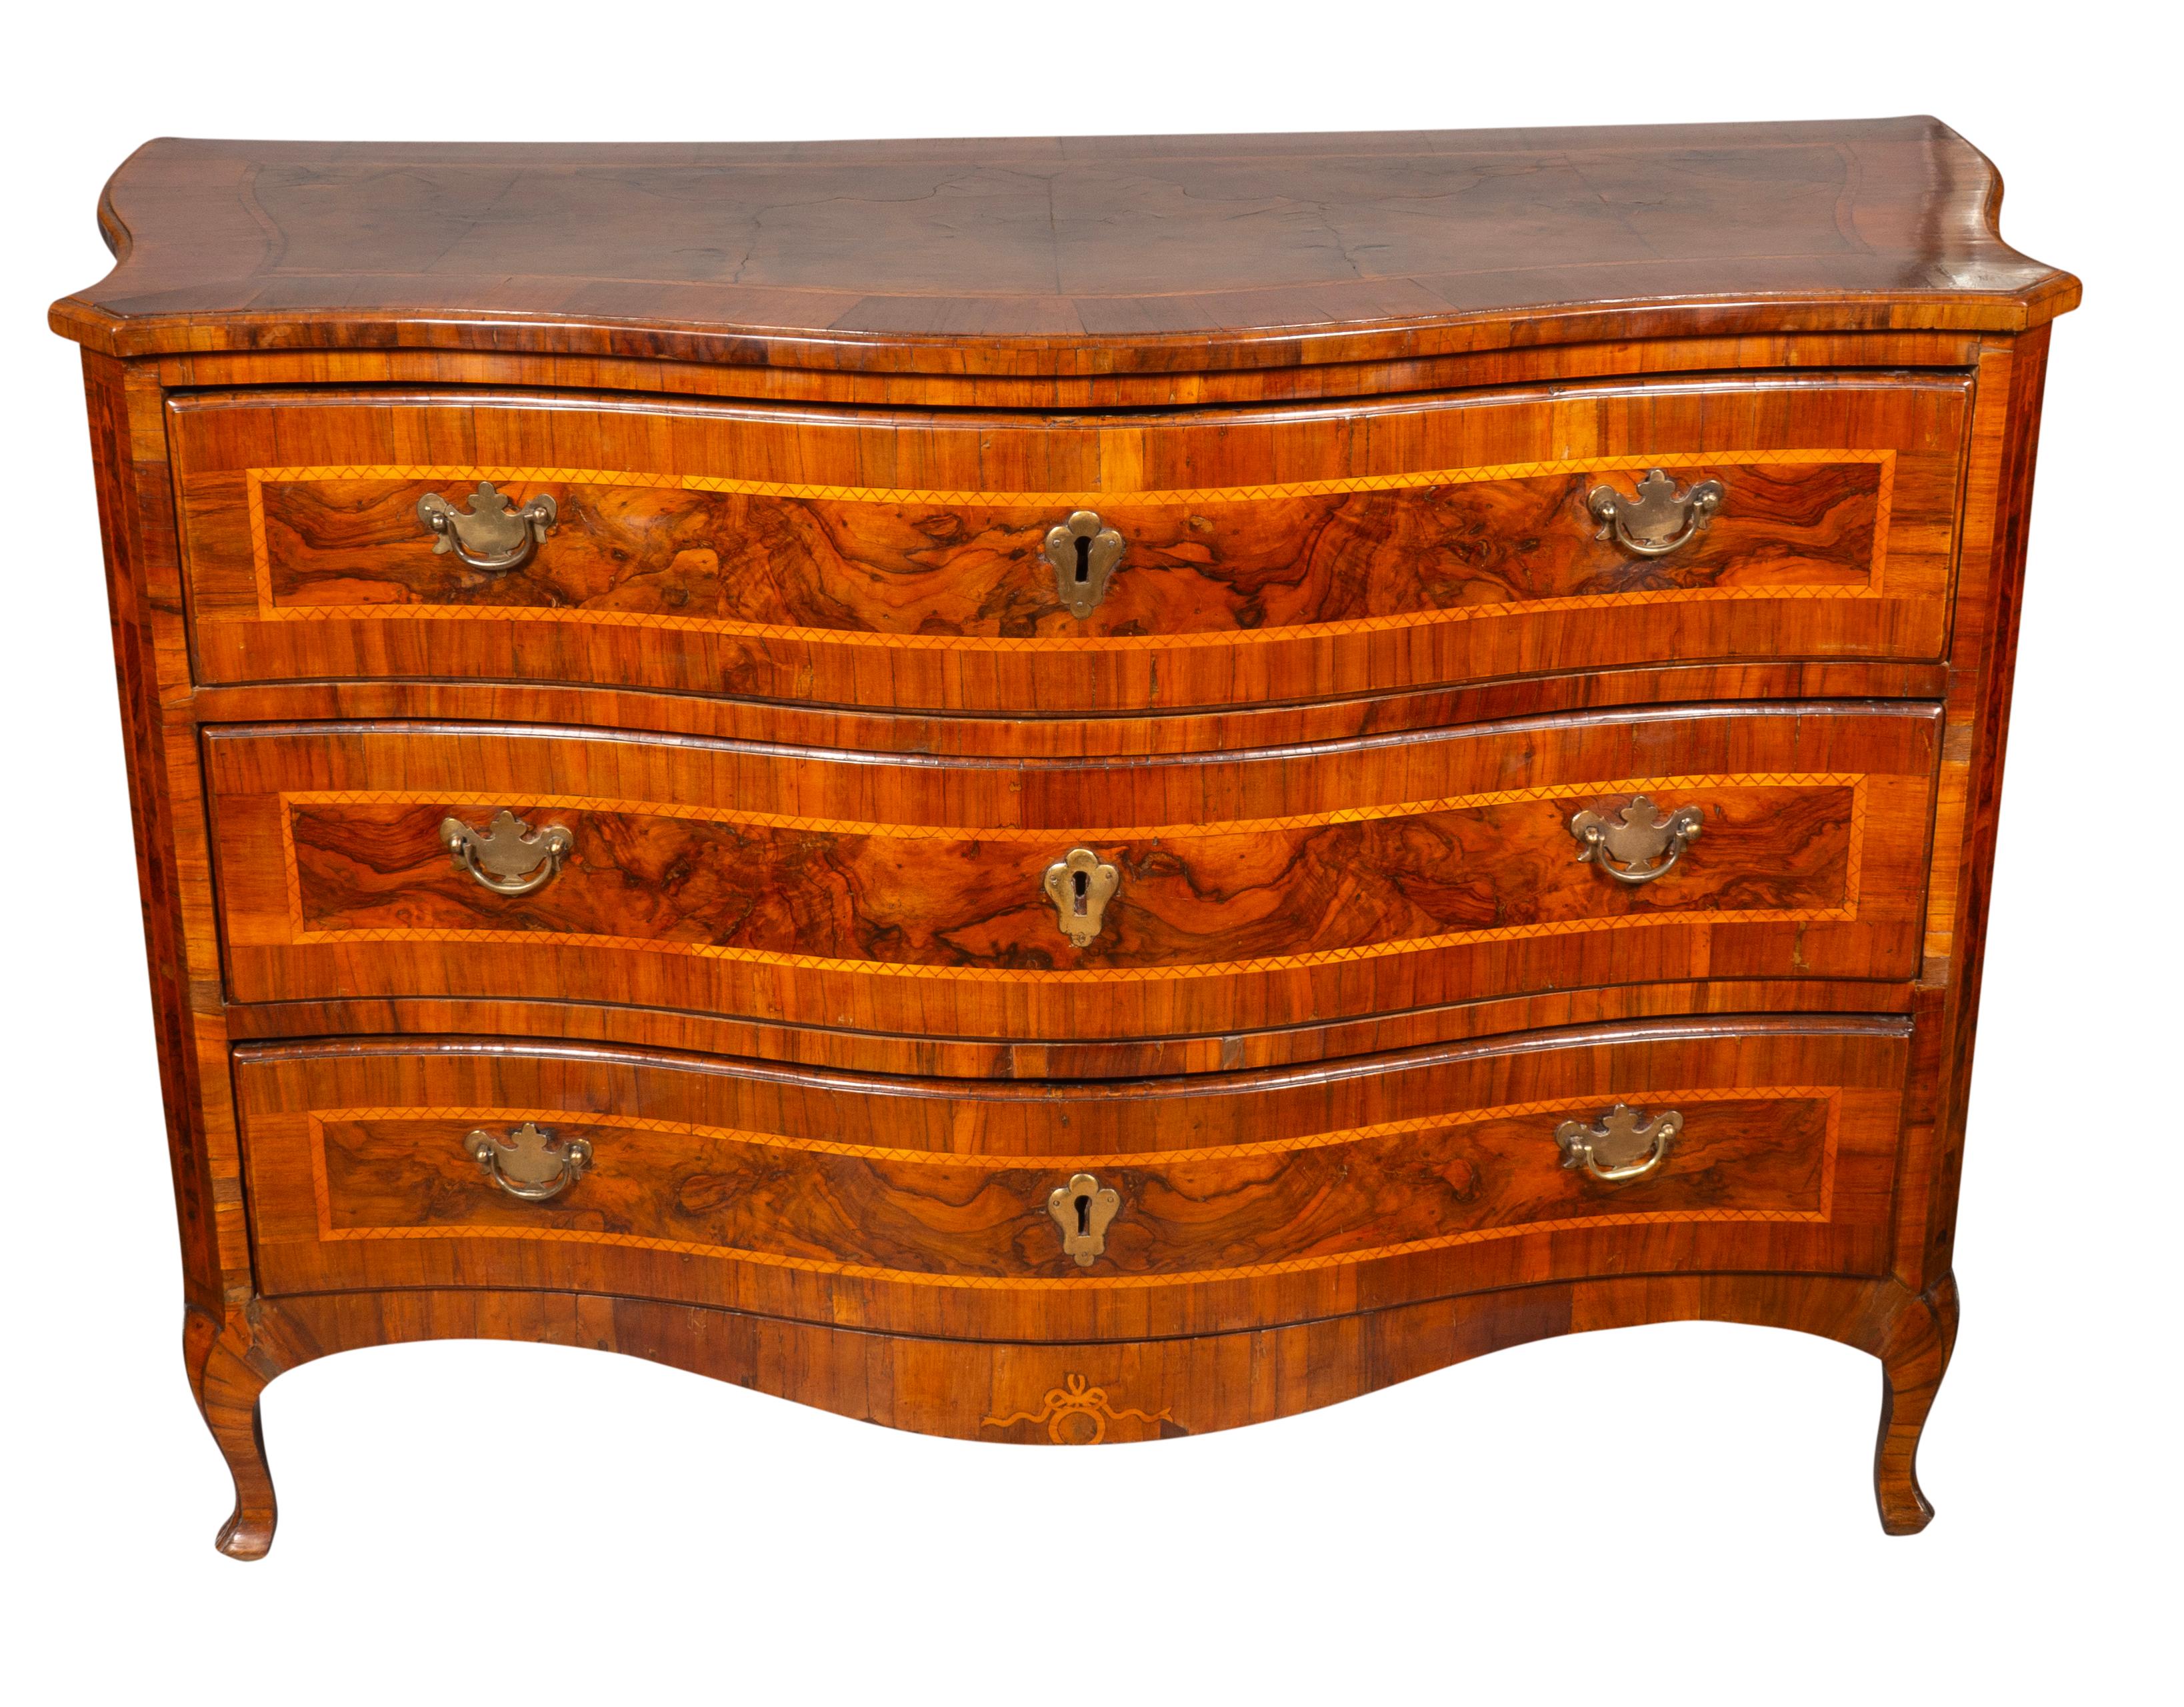 A good clean chest with a serpentine top with banded edge over three conforming drawers with brass handles and escutcheons. Nice brown patina.  Cabriole legs.